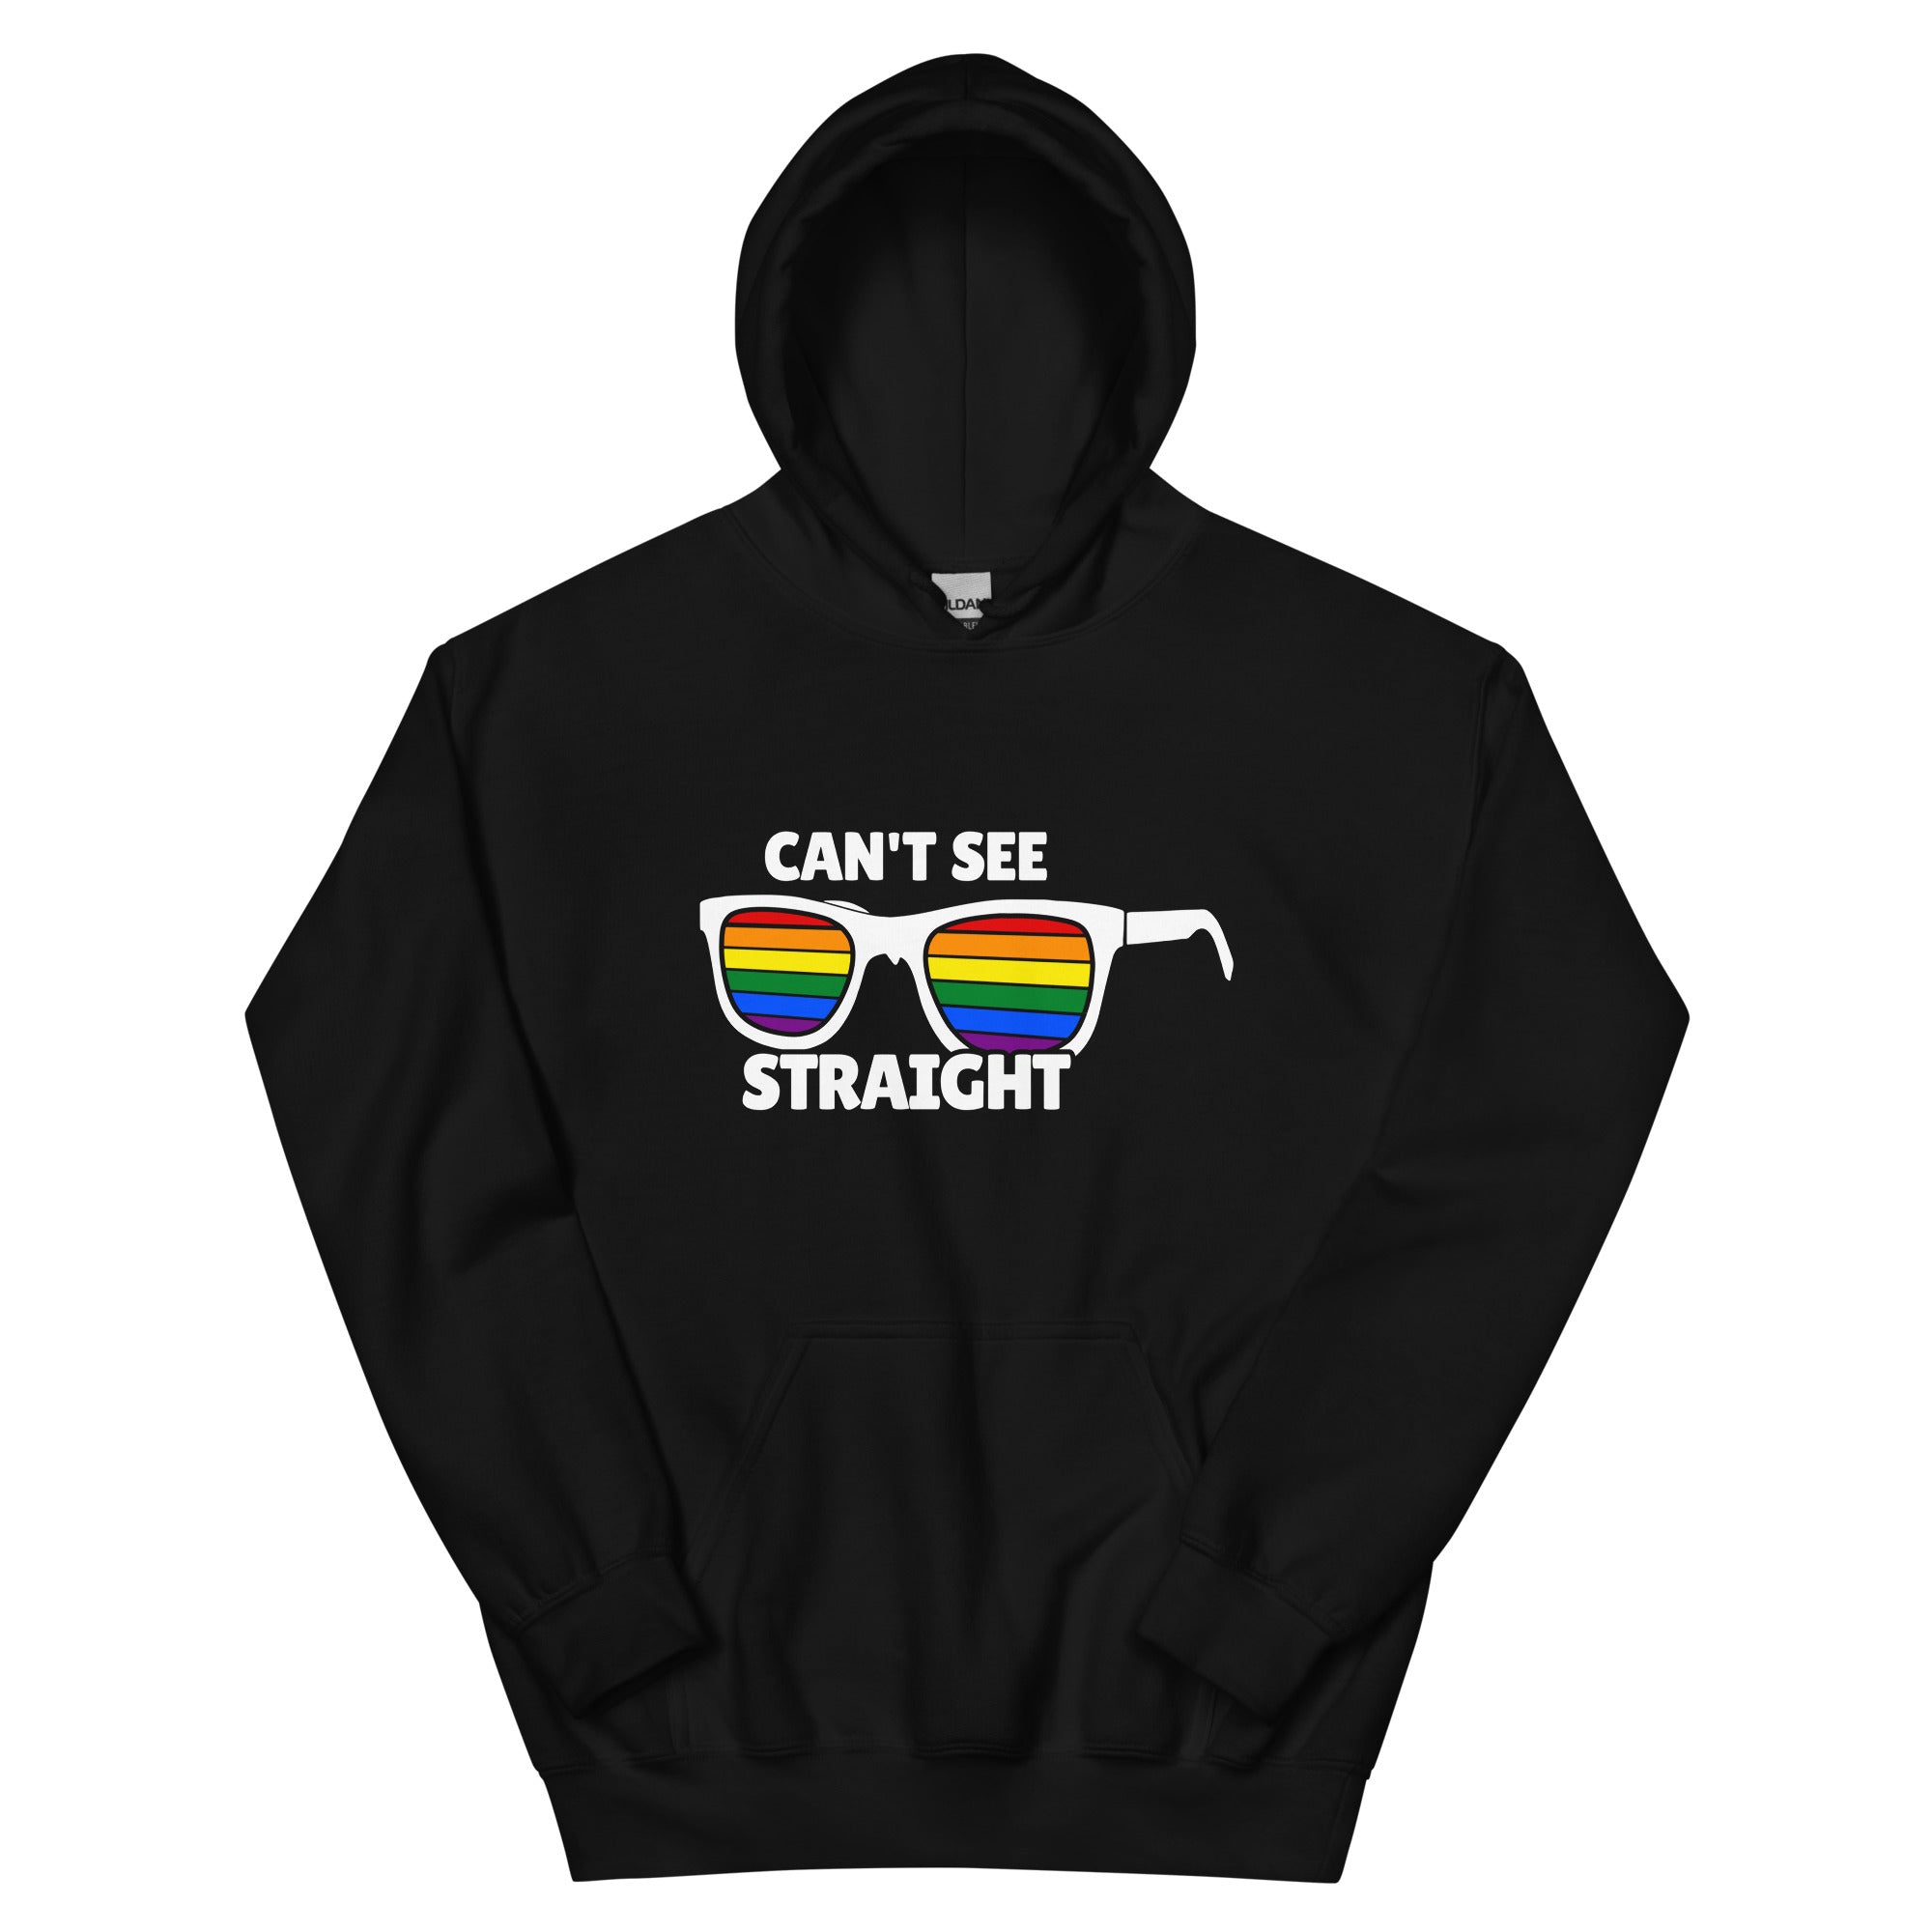 I Can't See Straight - Unisex Hoodie